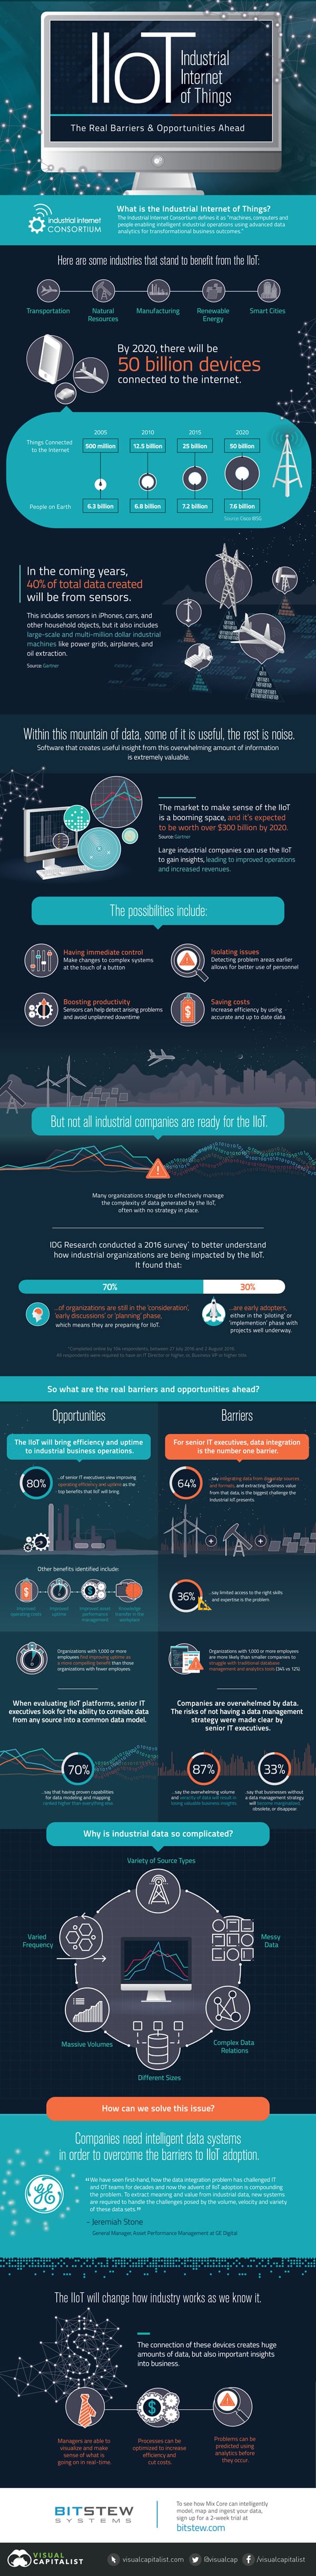 The Industrial Internet of Things - IIoT barriers and opportunities according to Visual Capitalist